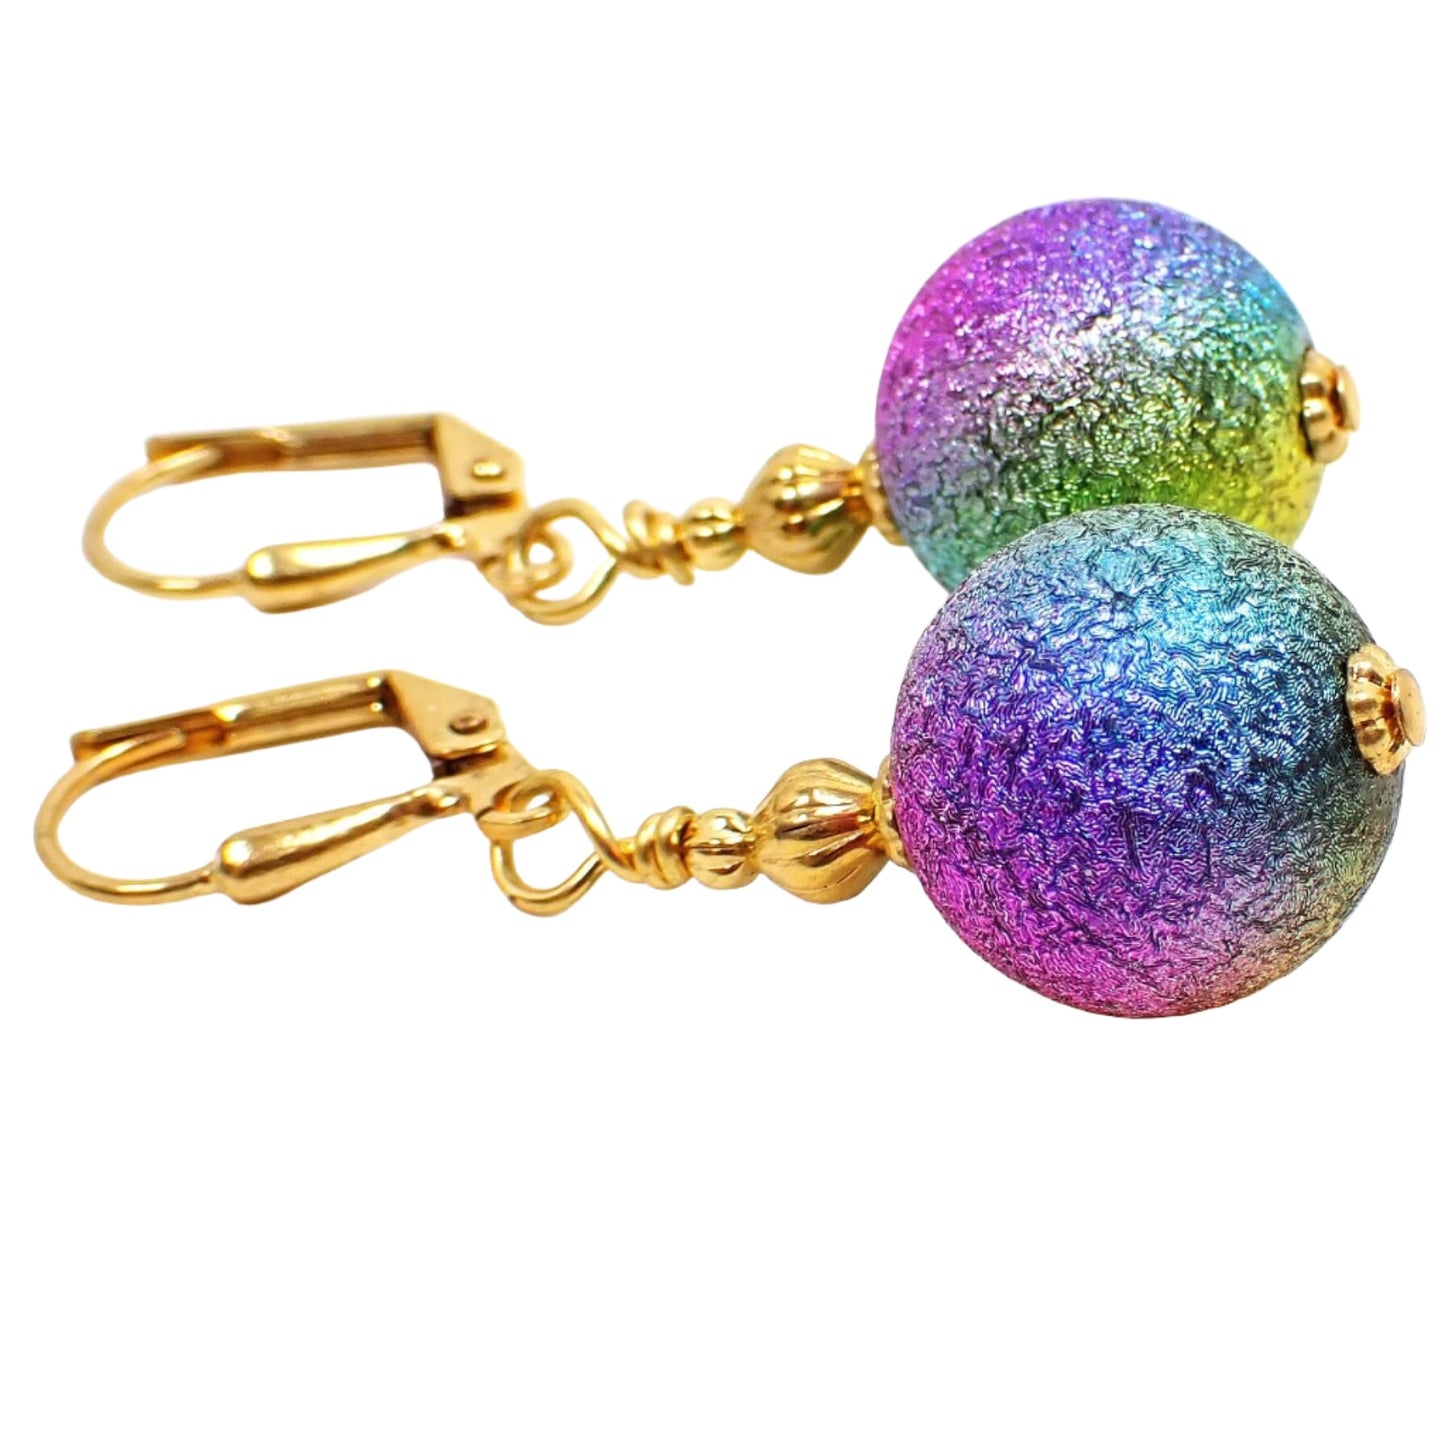 Side view of the handmade metallic rainbow earrings. The metal is gold plated in color. There are large round ball beads at the bottom that are textured and have metallic colors of the rainbow blended all the way around the beads.